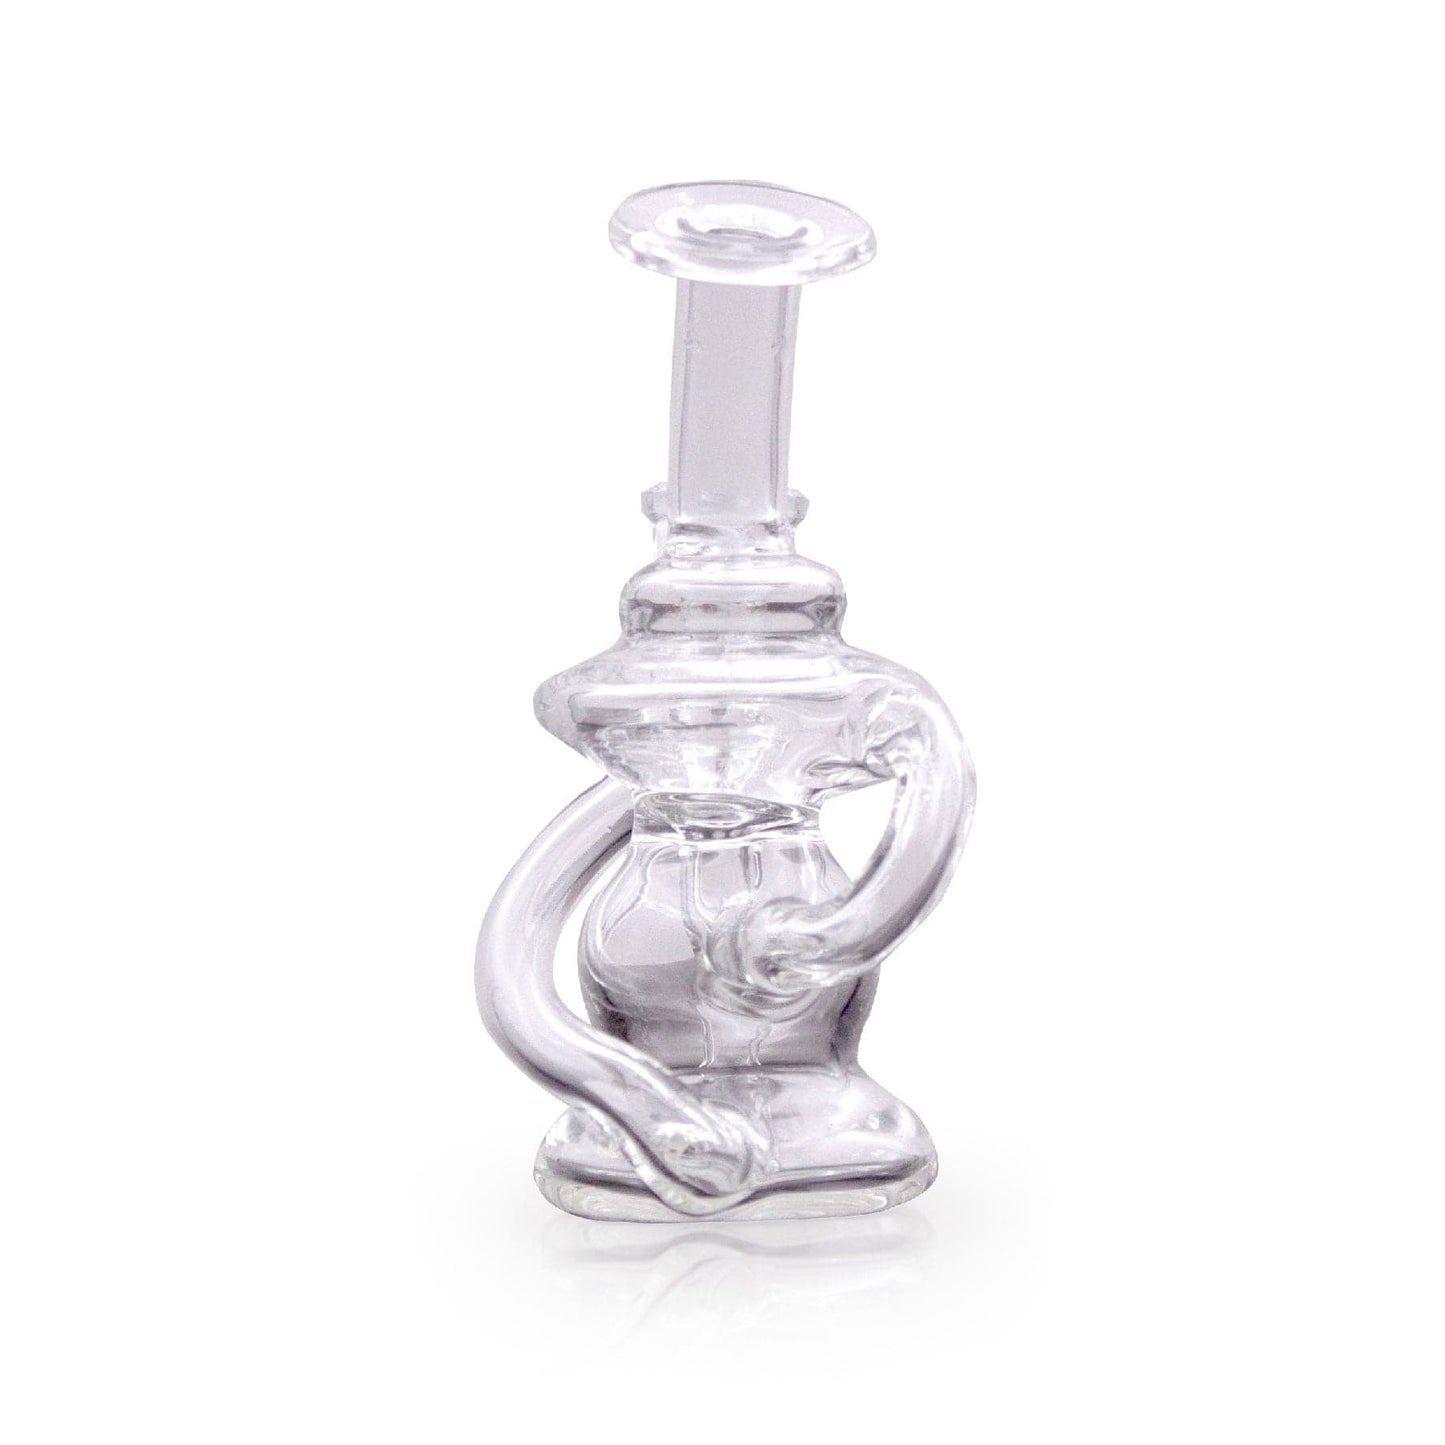 Klein Recycler Mini Rig: Big Performance in a Compact Design